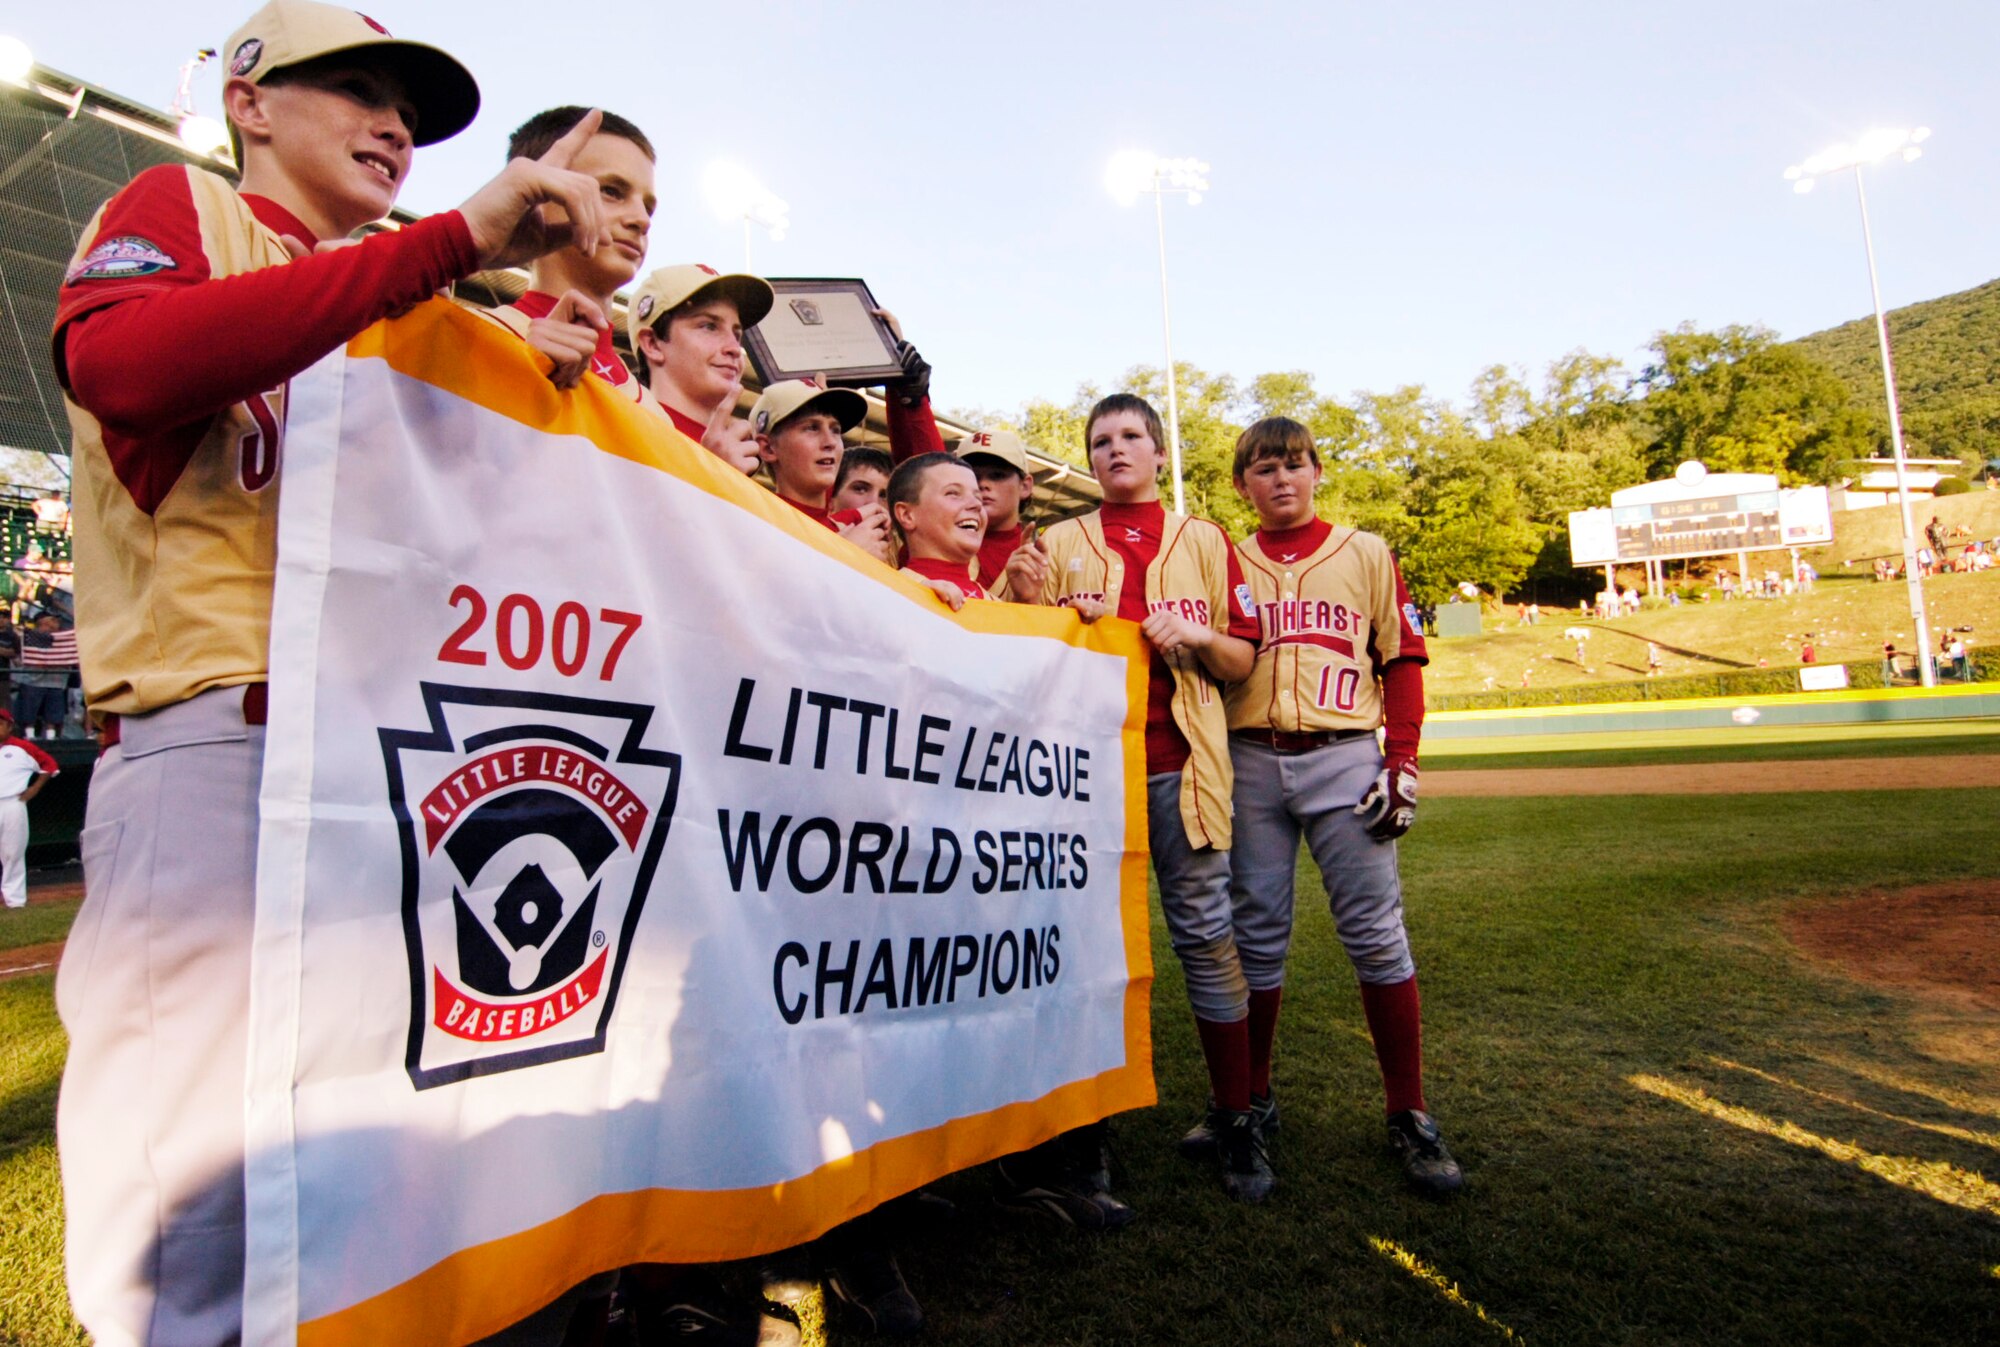 Players on the Warner Robins American Little League team hold up their Little League World Series Championship flag after their 3-2 win over Japan Aug. 26. (U.S. Air Force photo by Jason Vorhees)